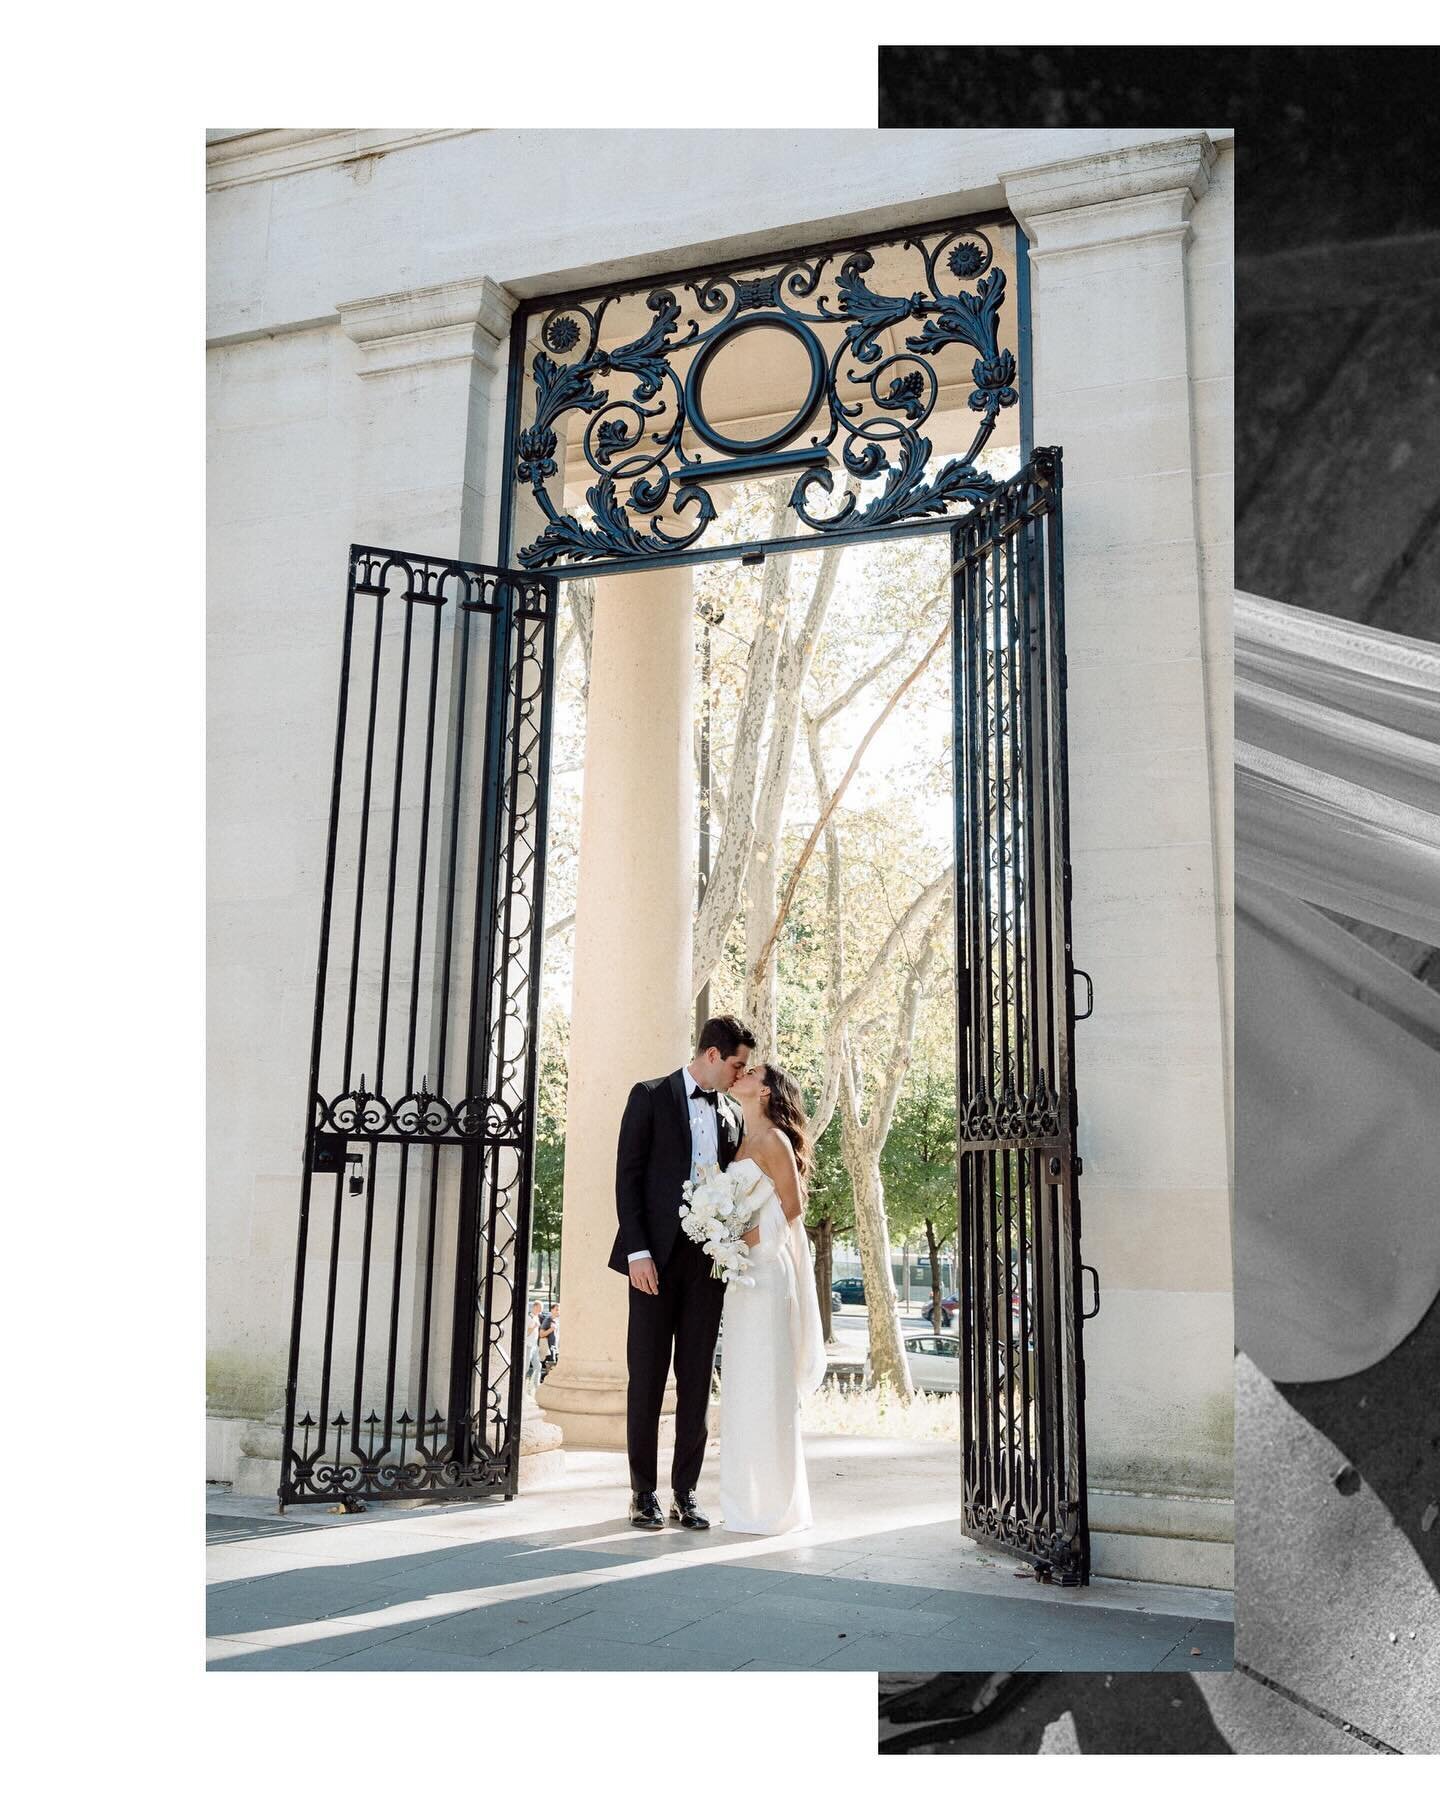 We&rsquo;re totally obsessed with Eva and Nick&rsquo;s gallery. These two got the most perfect September day. Congratulations you guys!!

#phillyphotographer #philadelphiaphotographer #phillyweddingphotographer #philadelphiaweddingphotographer #phill